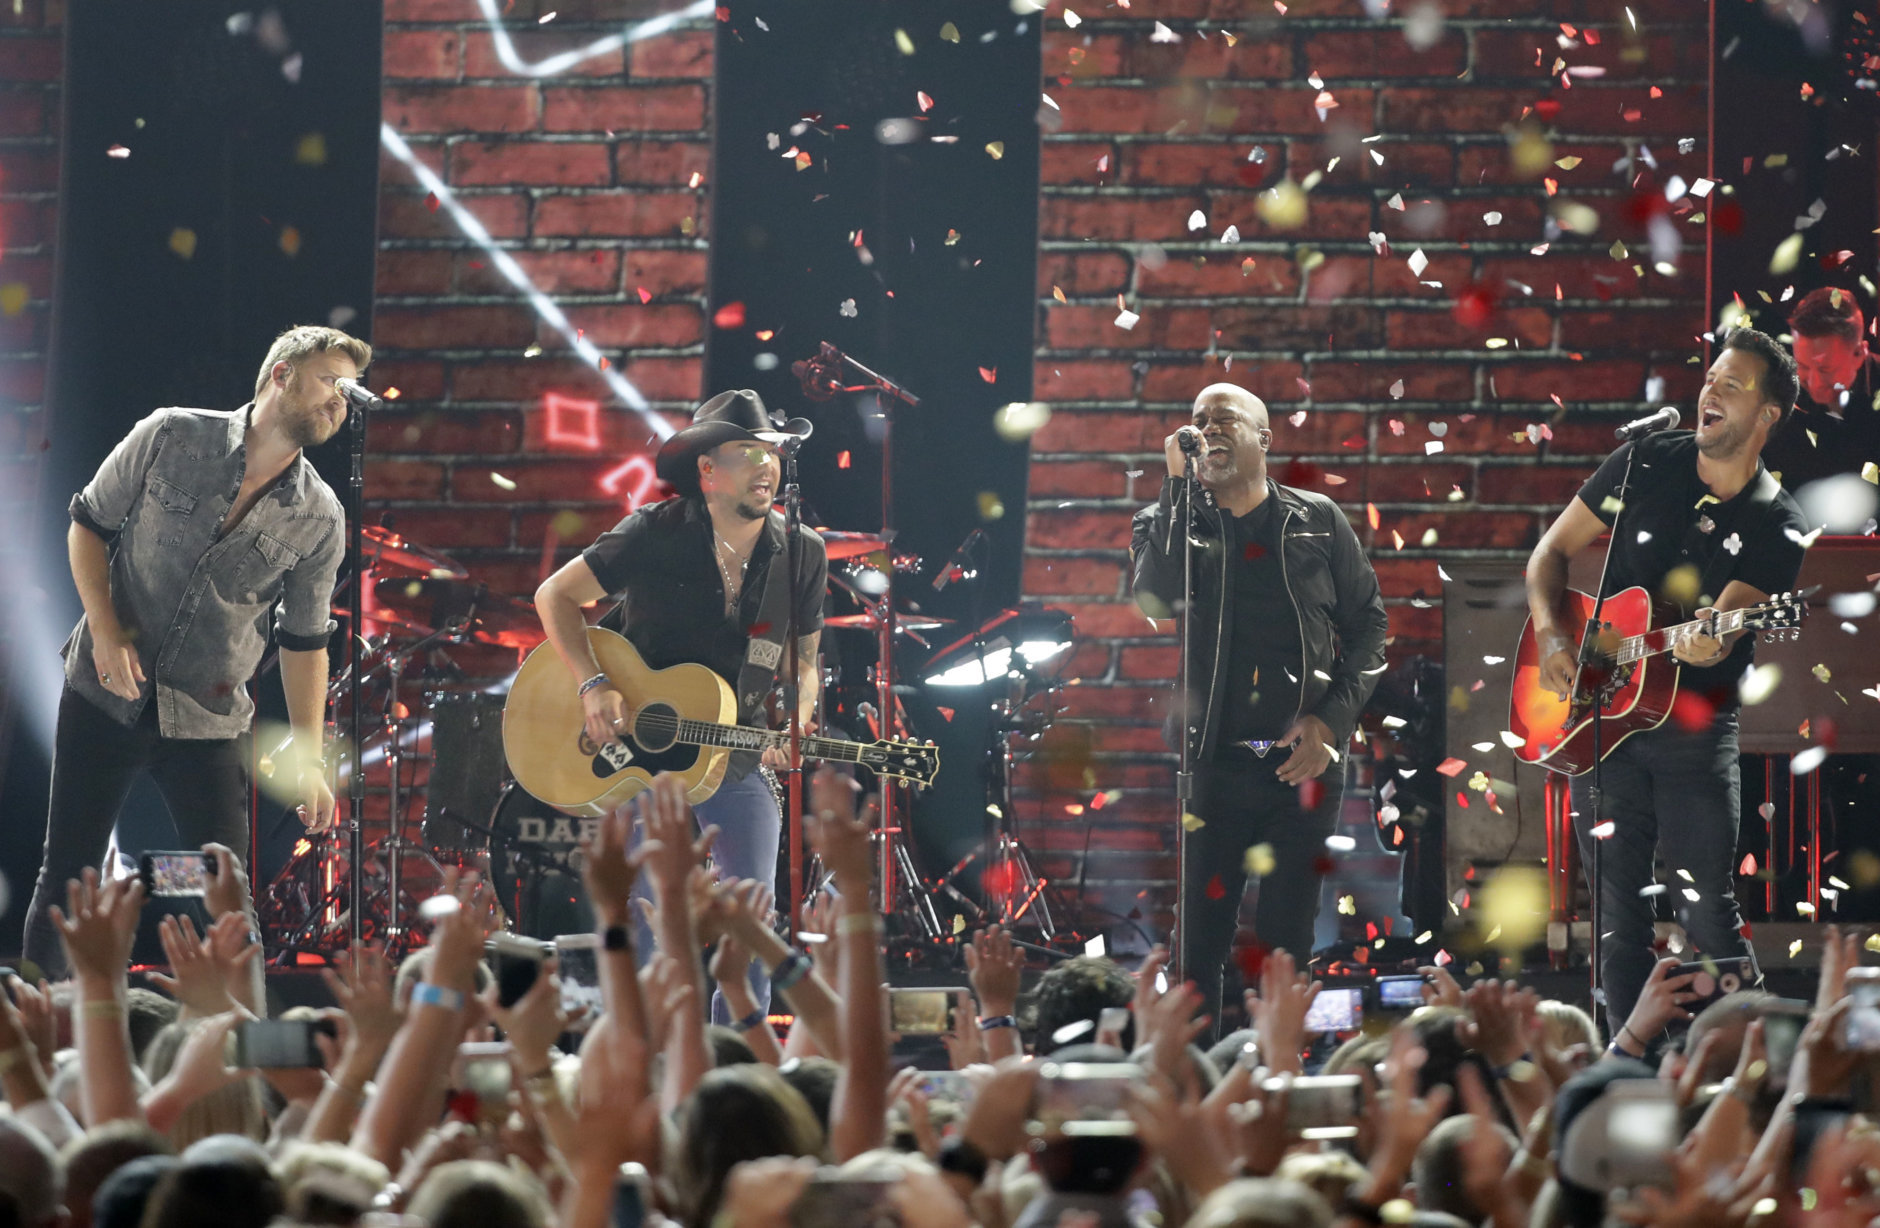 Charles Kelley, from left, Jason Aldean, Darius Rucker, and Luke Bryan perform "Straight To Hell" at the CMT Music Awards at the Bridgestone Arena on Wednesday, June 6, 2018, in Nashville, Tenn. (AP Photo/Mark Humphrey)